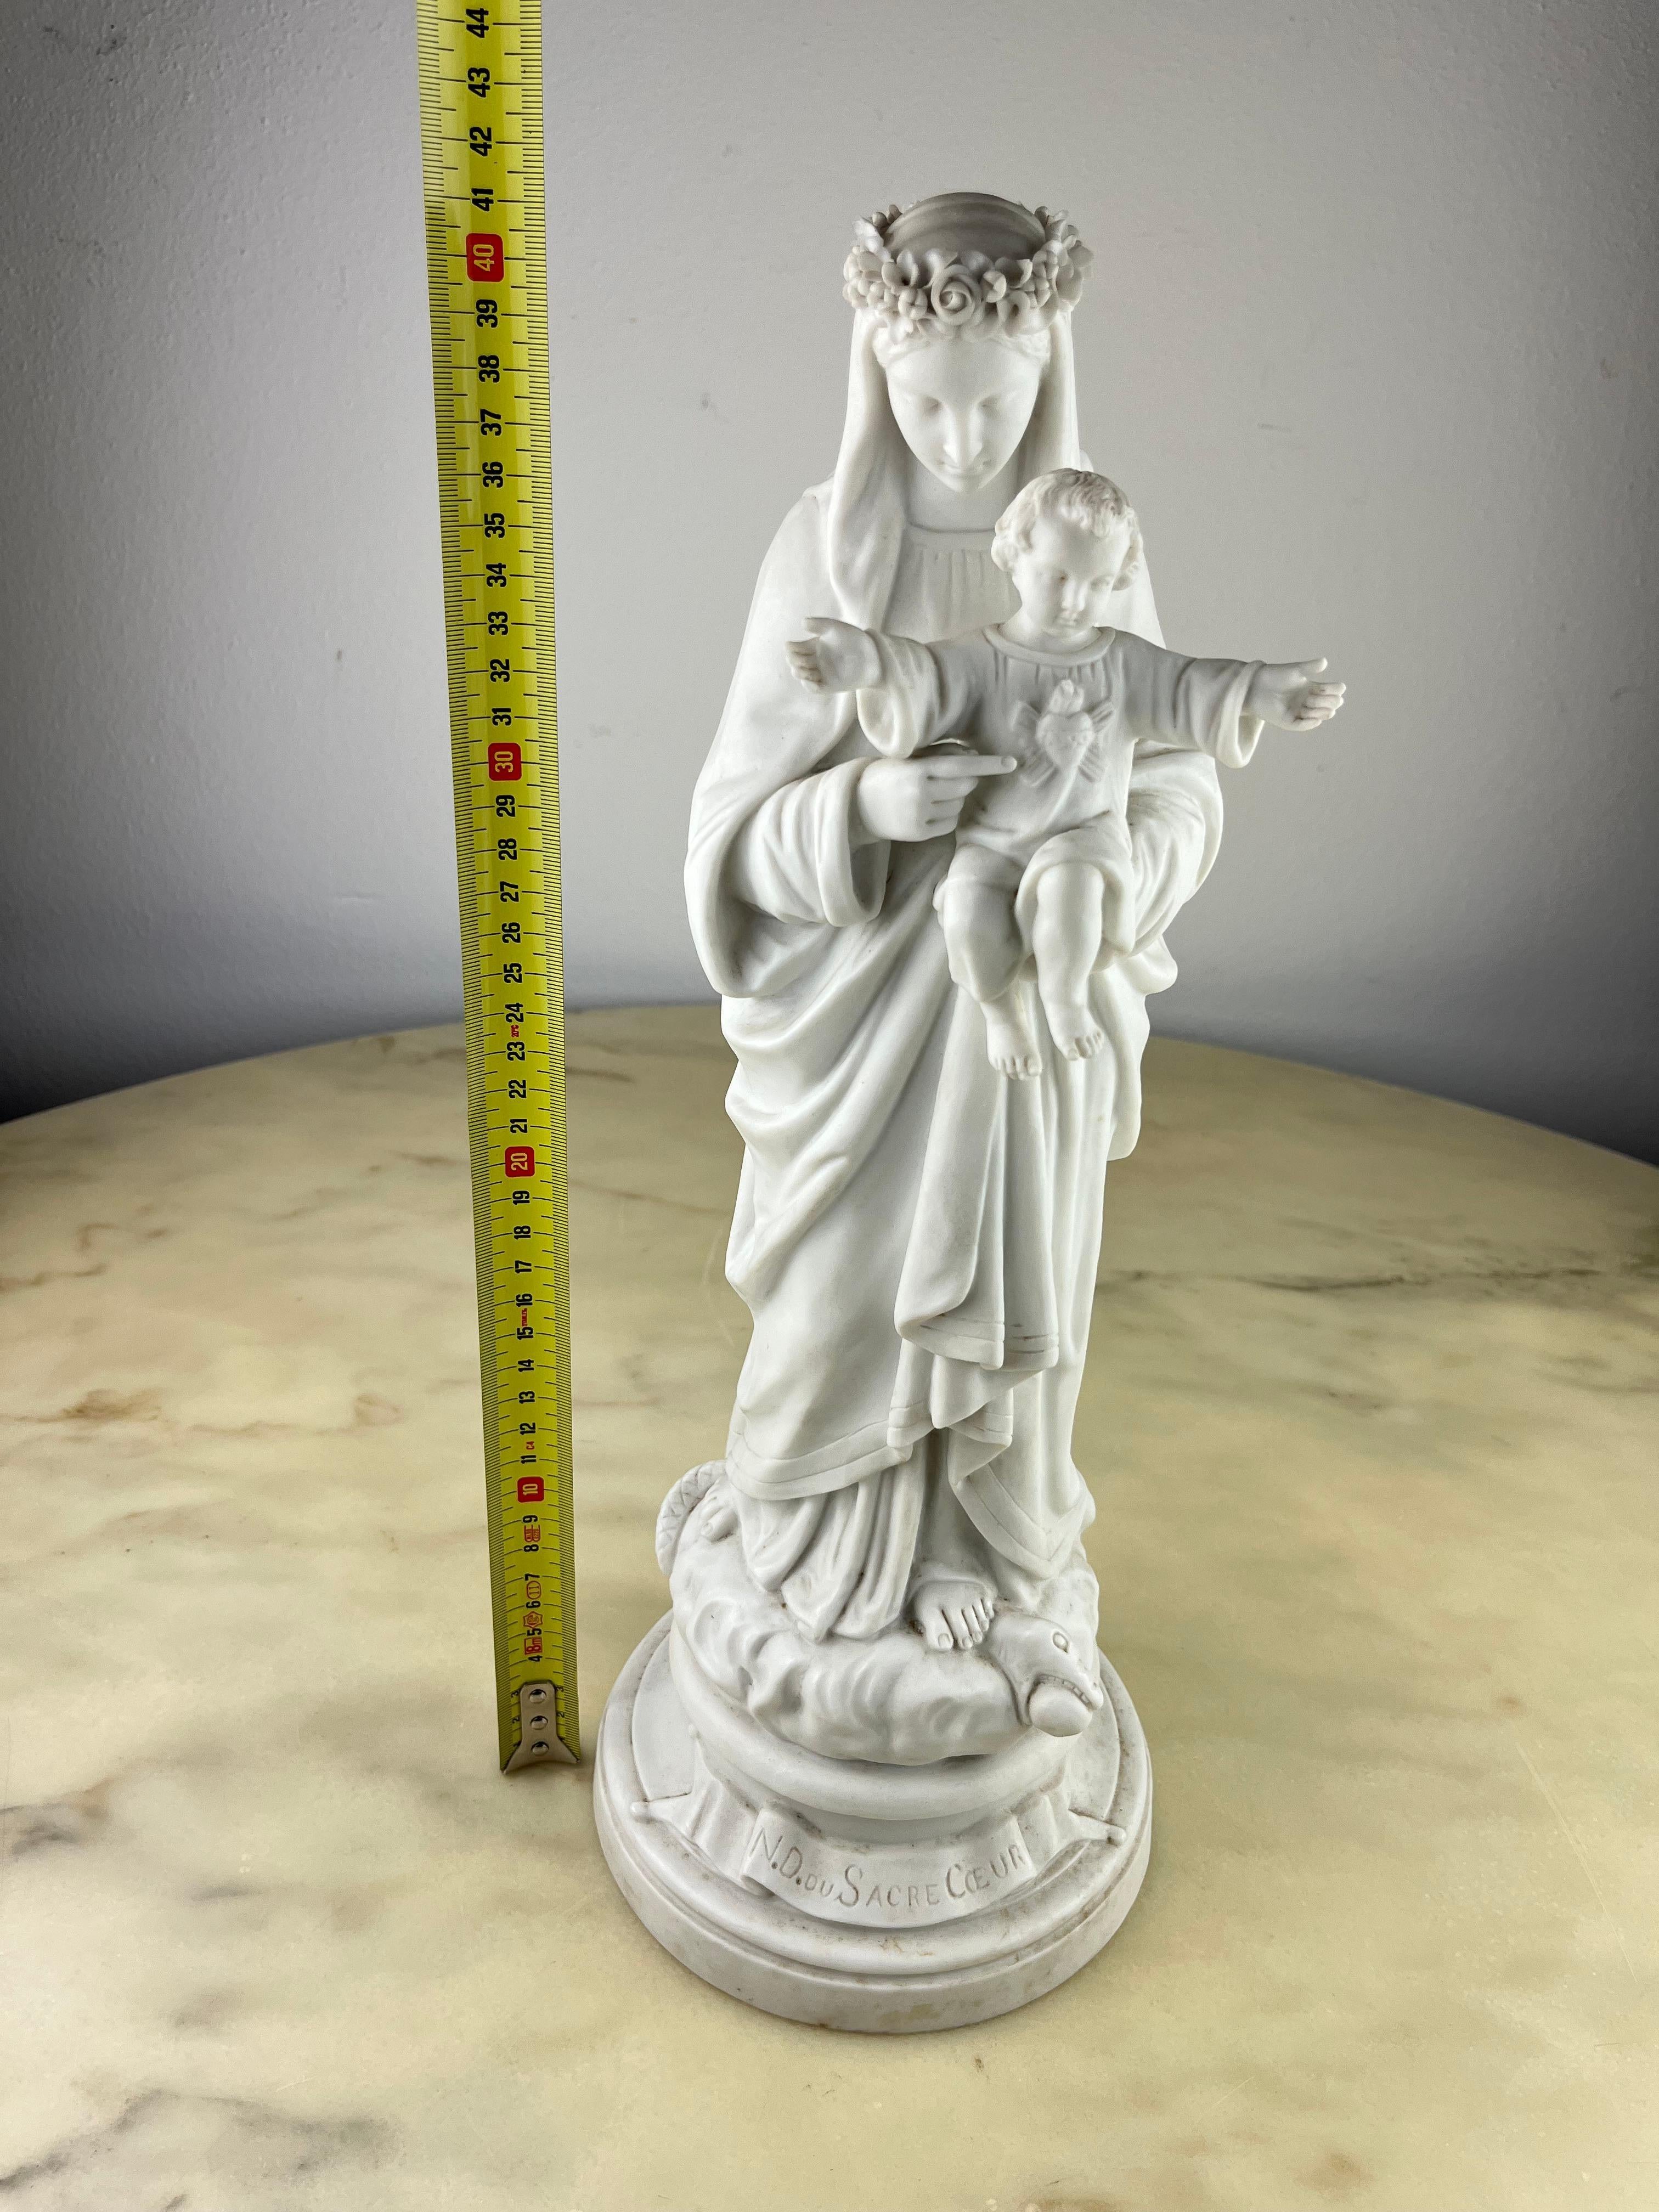 Notre Dame du Sacré Coeur porcelain statue, Italy, 1930s
Mary shows her son's heart as Jesus points to his mother.
Purchased in Turin, it is in excellent condition and has only a very small lack on the back of the base.
Inside a label with the name